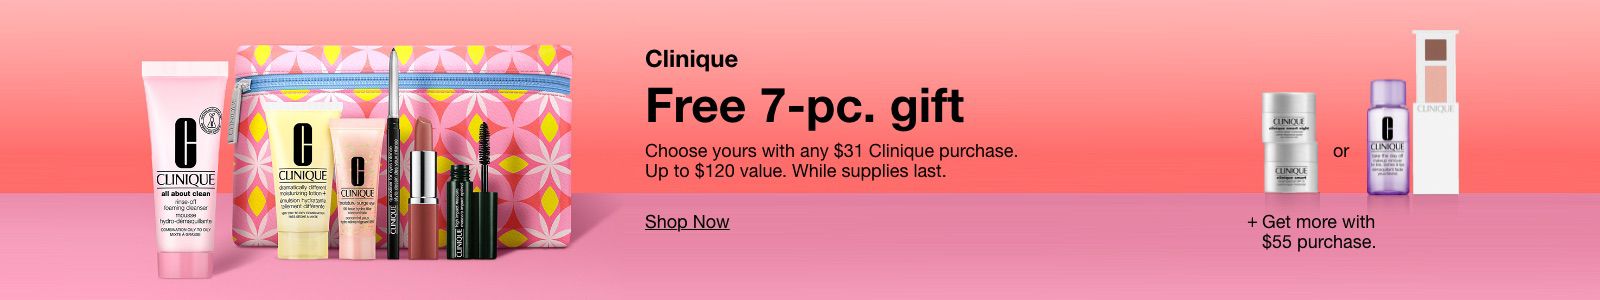 Clinique, Free 7-pc, gift, Shop Now, + Get more with $55 purchase